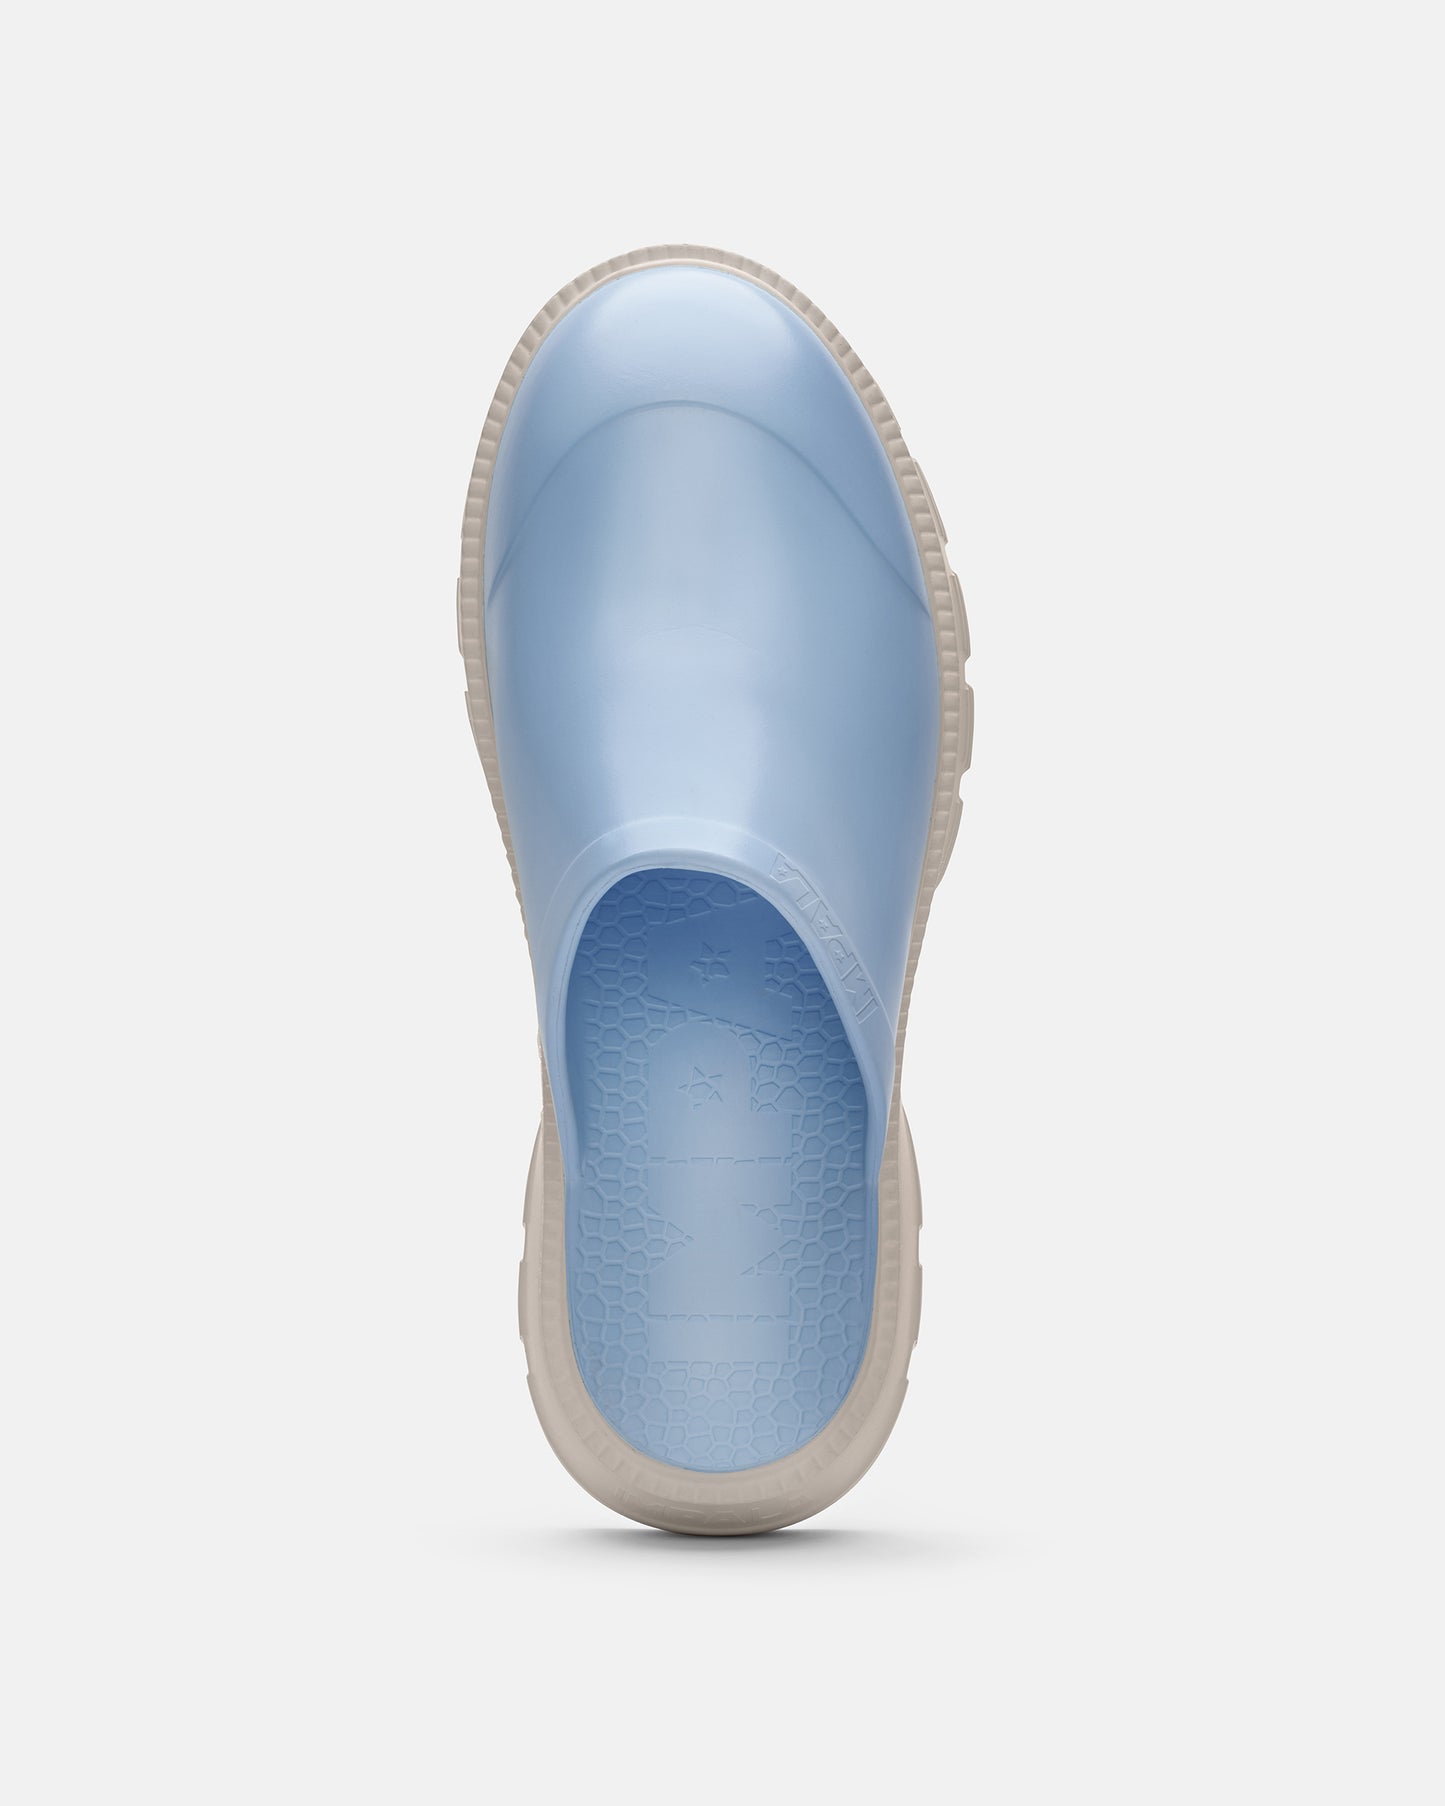 aerial view of Bubble Soft Mule - Blue/Cream